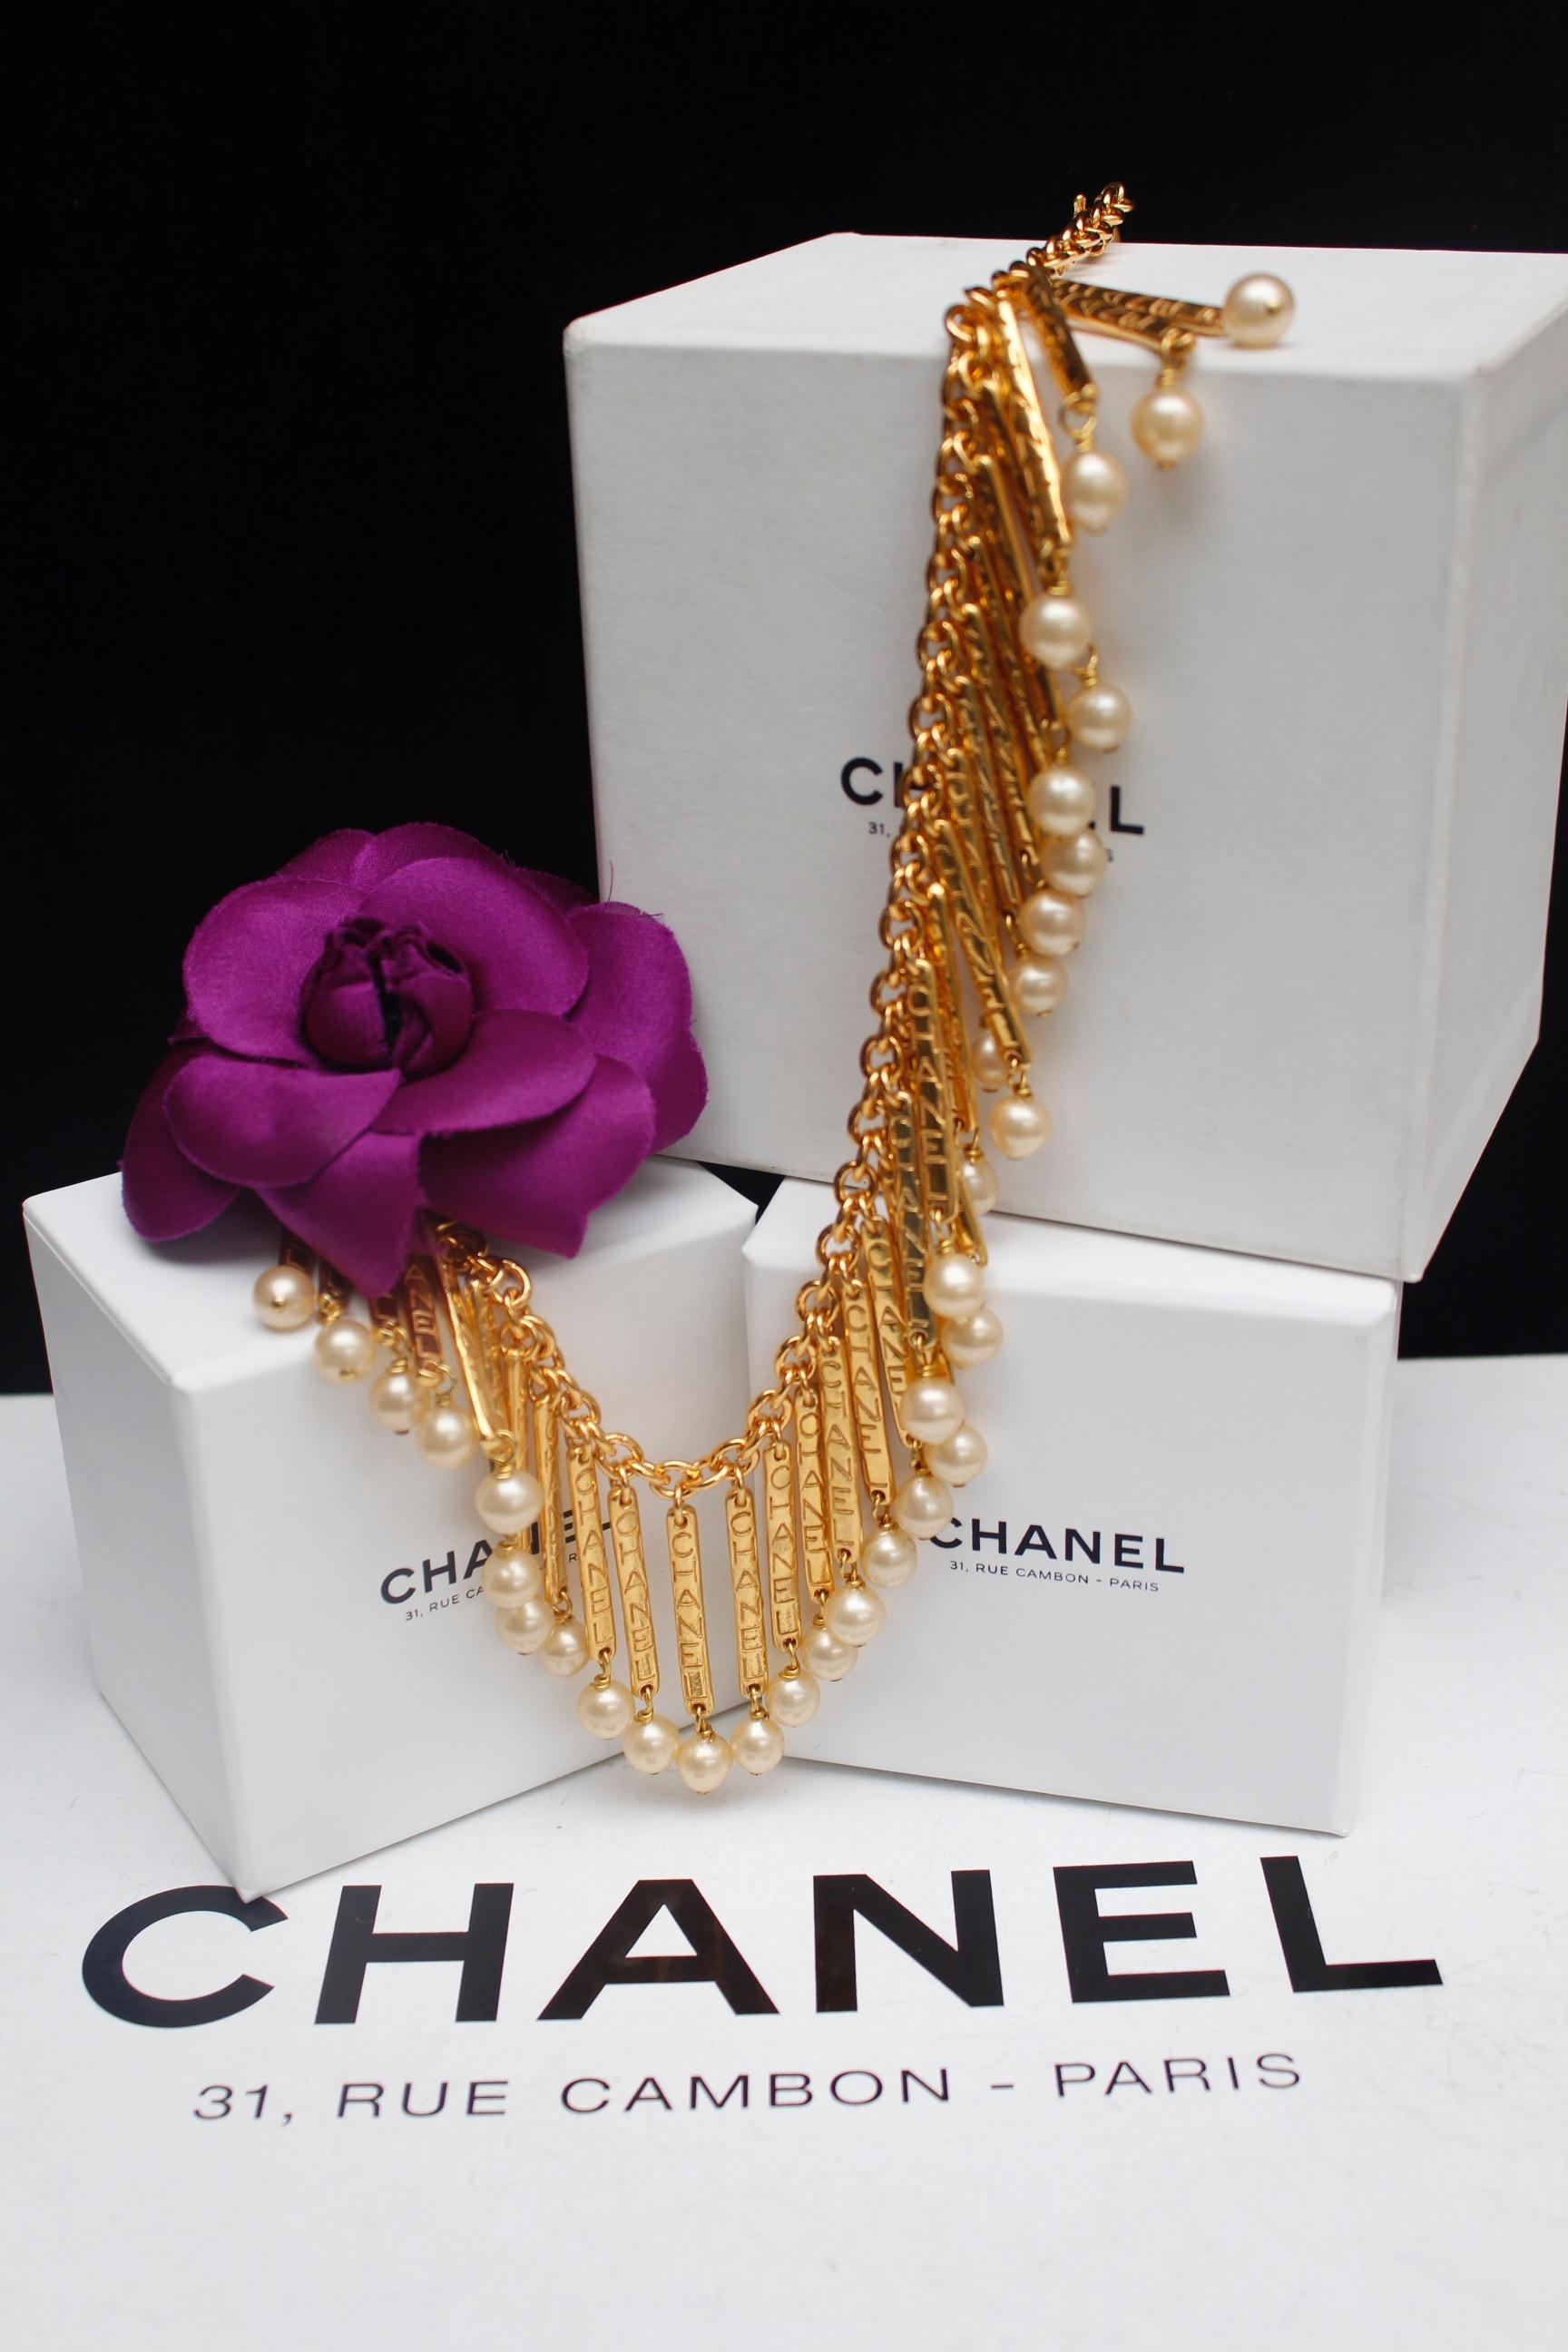 CHANEL (Made in France)

Nice gilted metal chain necklace adorned with along its length with gilted metal sticks hanging a faux pearl. Each stick is engraved with the Chanel inscription.

From the late 1980s.

Length : 16.1 in
 

Very good condition